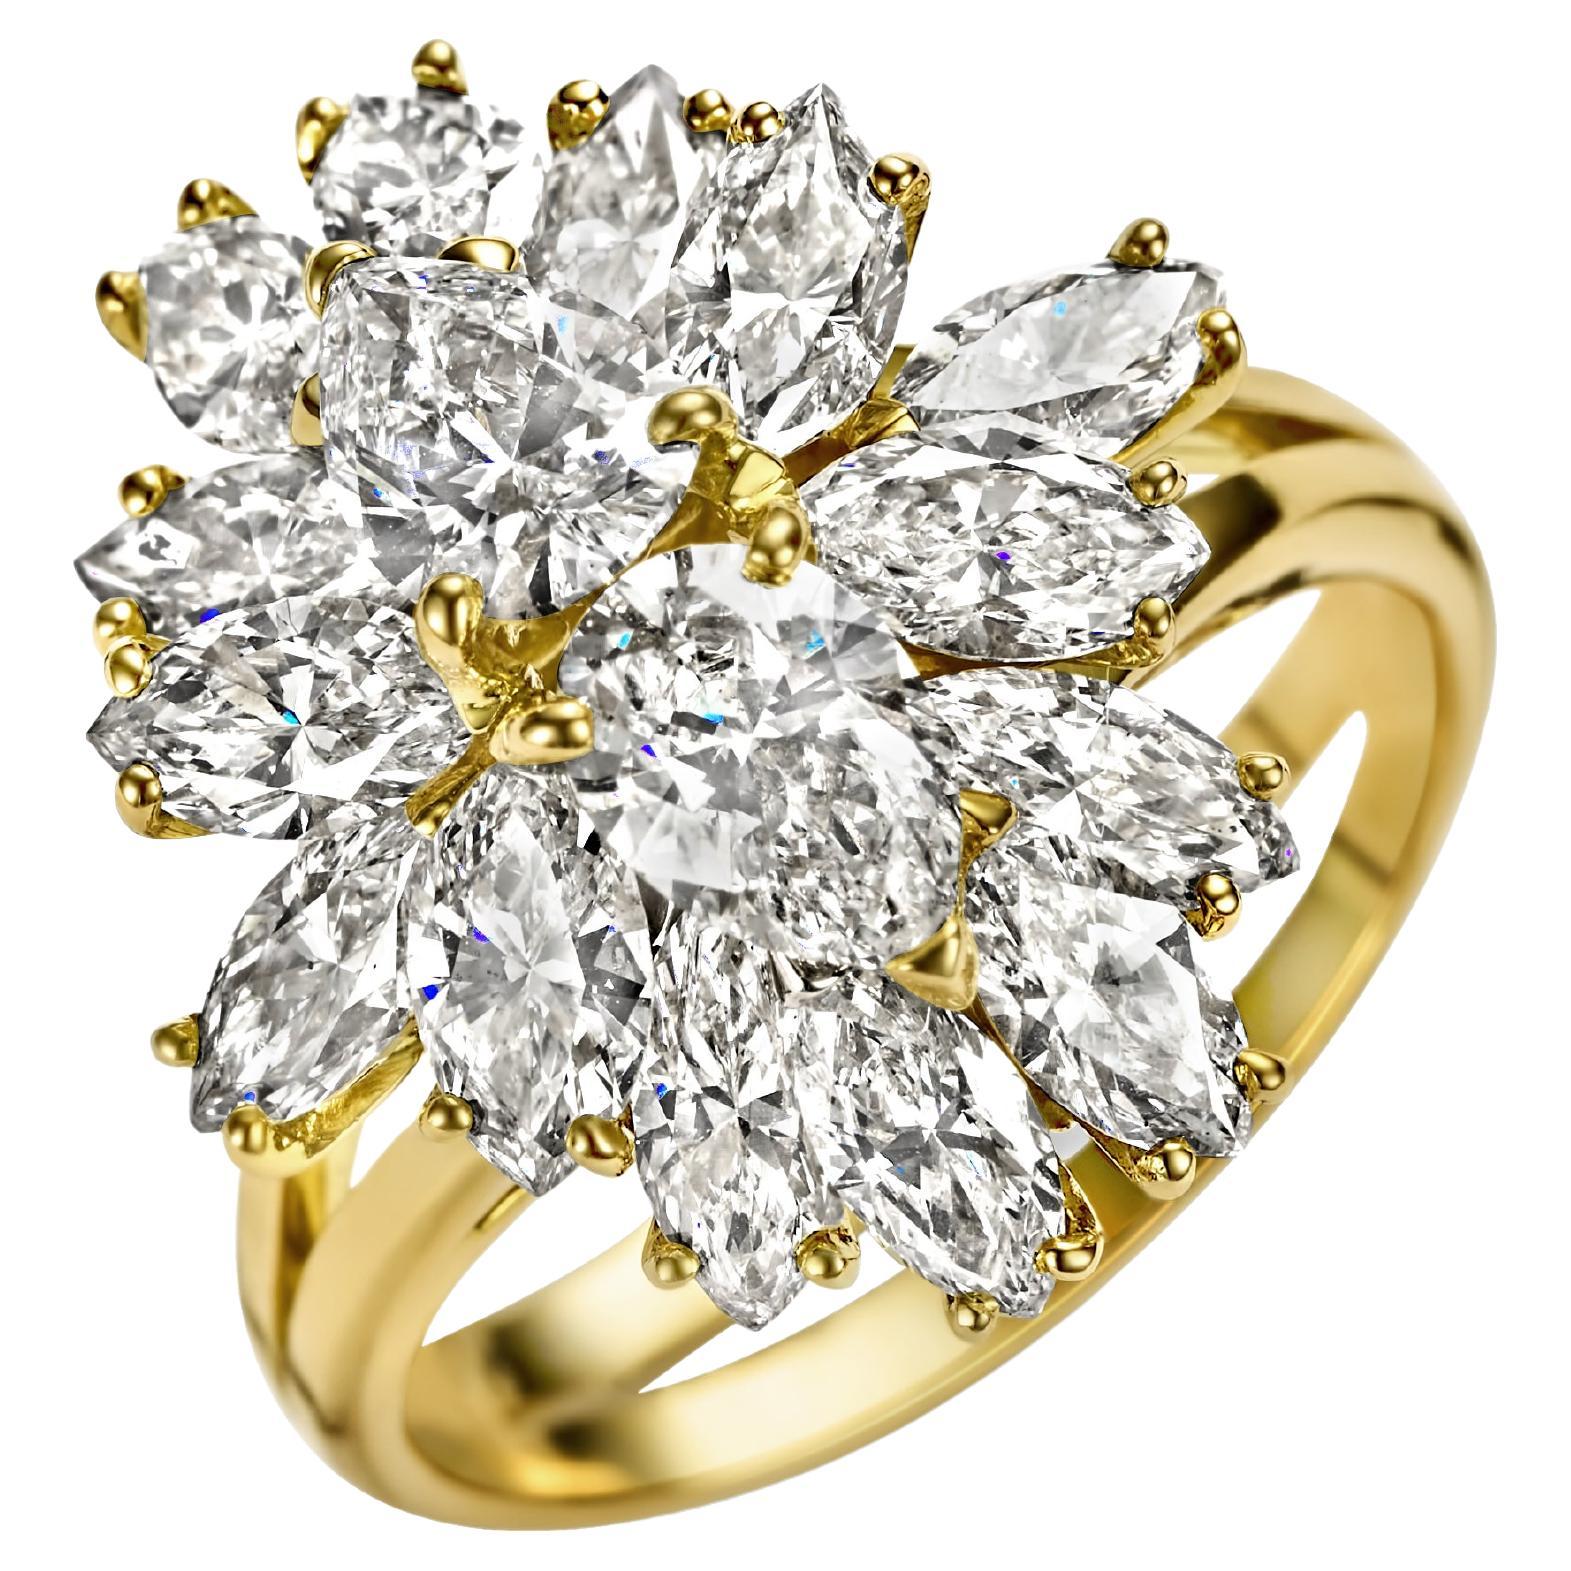 Asprey London 18kt. Yellow Gold Ring With 3.23 ct. Pear & Marquise Cut Diamonds For Sale